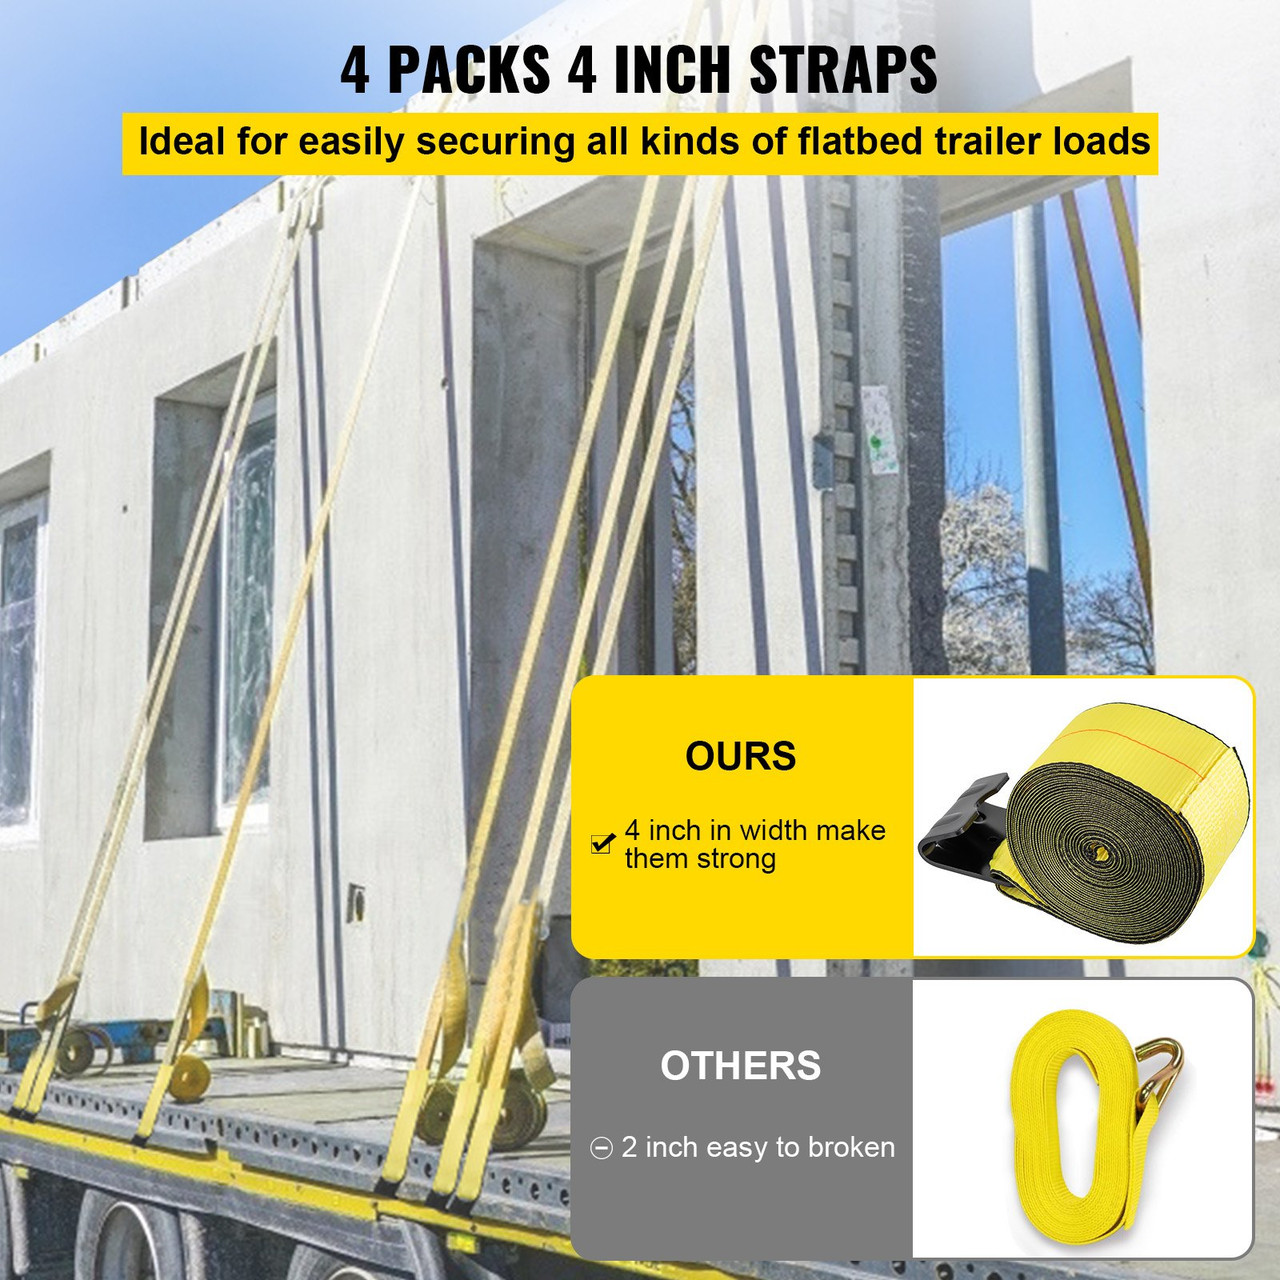 Truck Straps 4"x30' Winch Straps with a Flat Hook Flatbed Tie Downs 15400lbs Load Capacity Flatbed Strap Cargo Control for Flatbeds, Trucks, Trailers, Farms, Rescues, Tree Saver, Yellow(4 Pack)